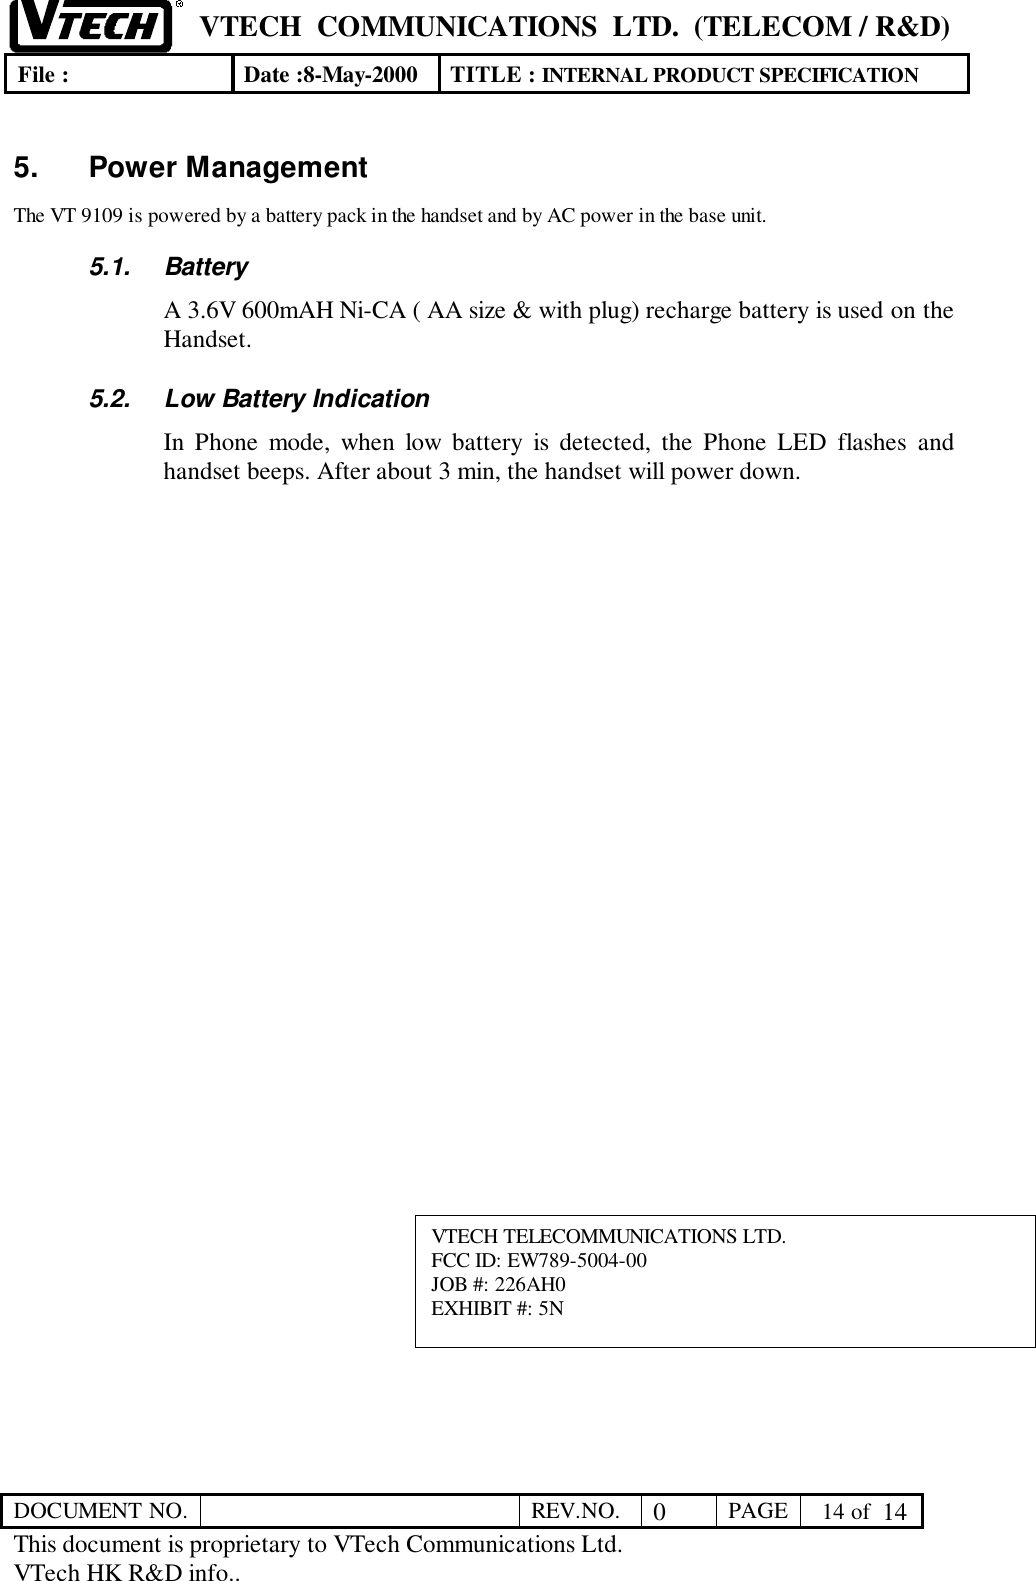 VTECH  COMMUNICATIONS  LTD.  (TELECOM / R&amp;D)File : Date :8-May-2000 TITLE : INTERNAL PRODUCT SPECIFICATIONDOCUMENT NO. REV.NO. 0PAGE  14 of  14This document is proprietary to VTech Communications Ltd.VTech HK R&amp;D info..5. Power ManagementThe VT 9109 is powered by a battery pack in the handset and by AC power in the base unit.5.1. BatteryA 3.6V 600mAH Ni-CA ( AA size &amp; with plug) recharge battery is used on theHandset.5.2.  Low Battery IndicationIn Phone mode, when low battery is detected, the Phone LED flashes andhandset beeps. After about 3 min, the handset will power down.VTECH TELECOMMUNICATIONS LTD.FCC ID: EW789-5004-00JOB #: 226AH0EXHIBIT #: 5N